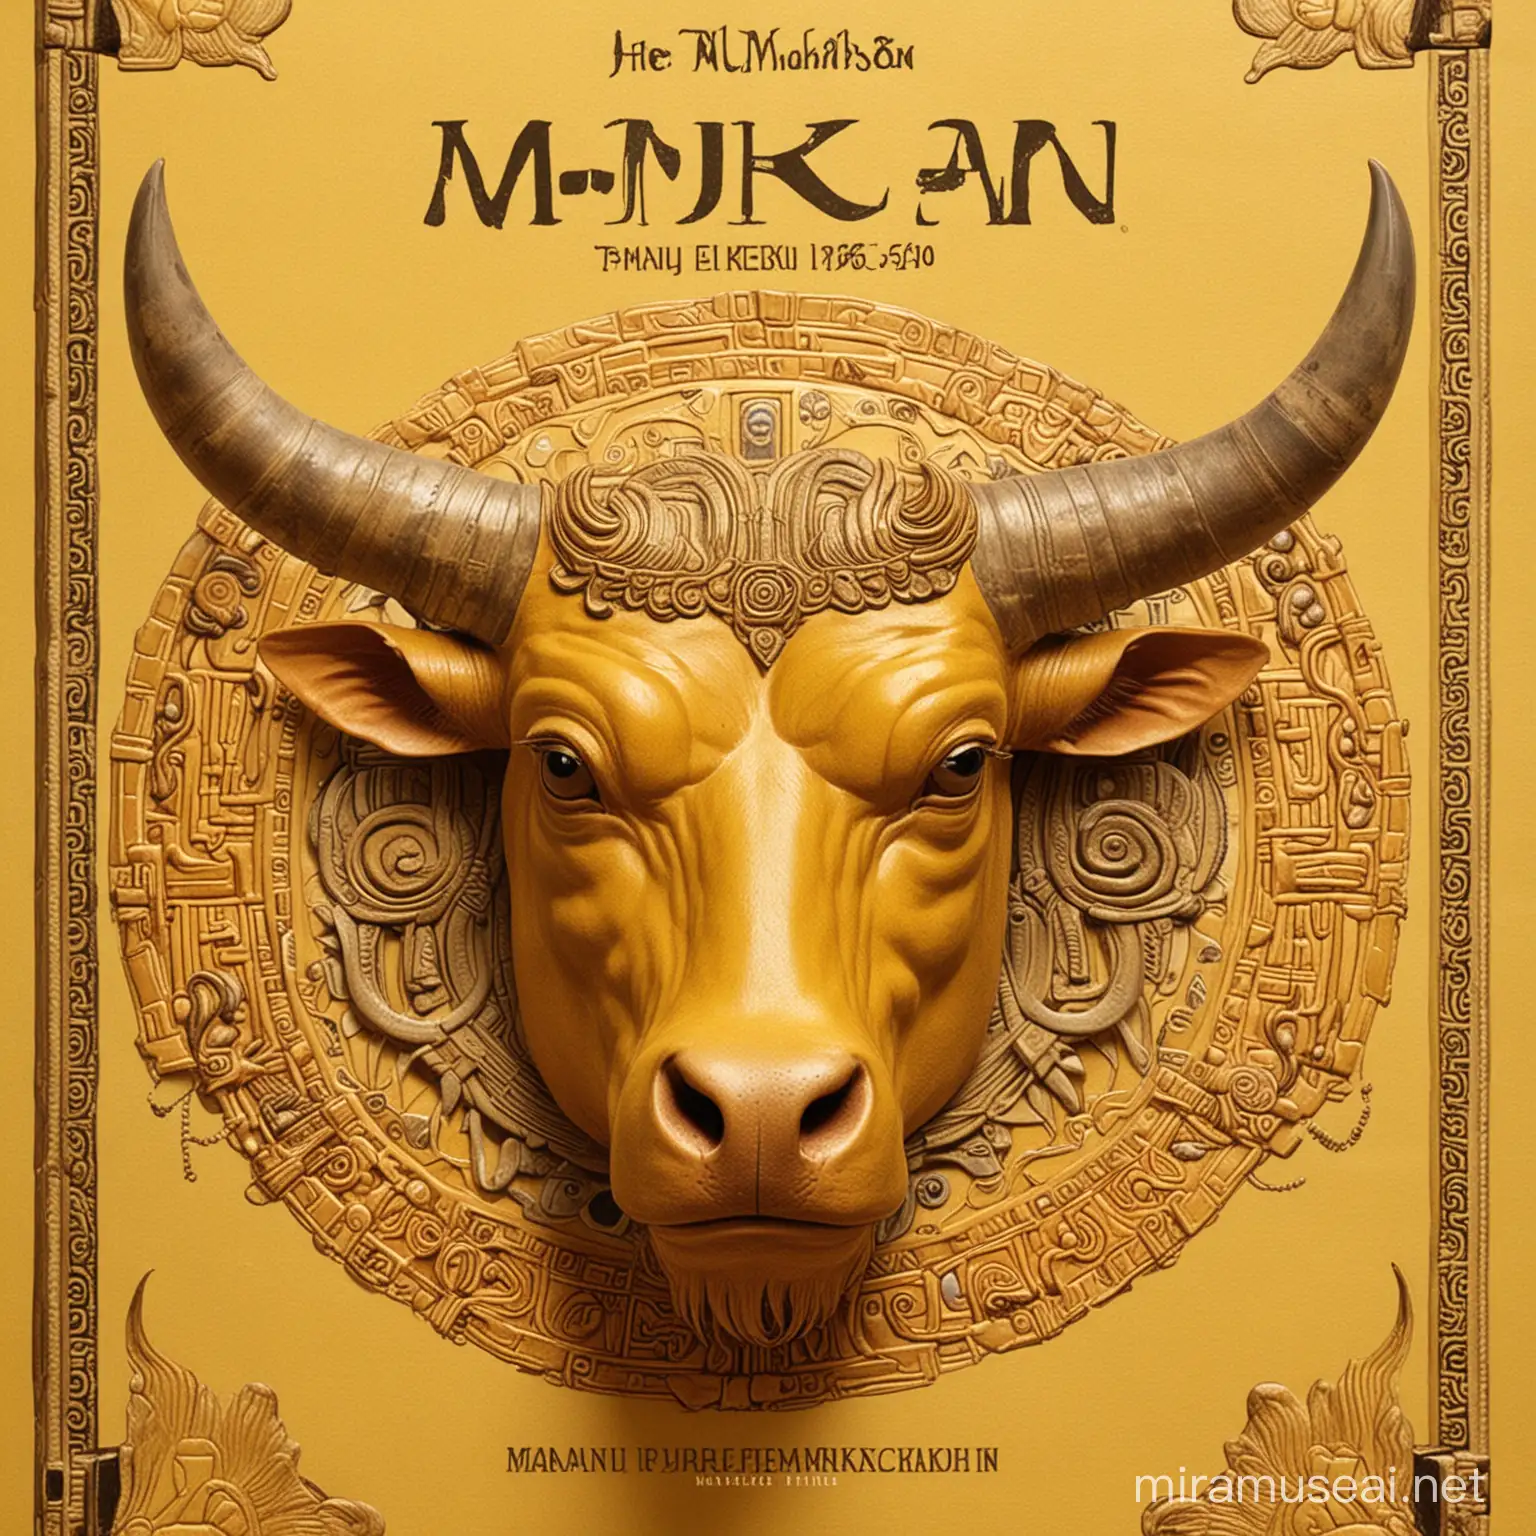 Ancient Minoan Bull Head Depicted on Yellow Book Cover Malki Grehoove Title